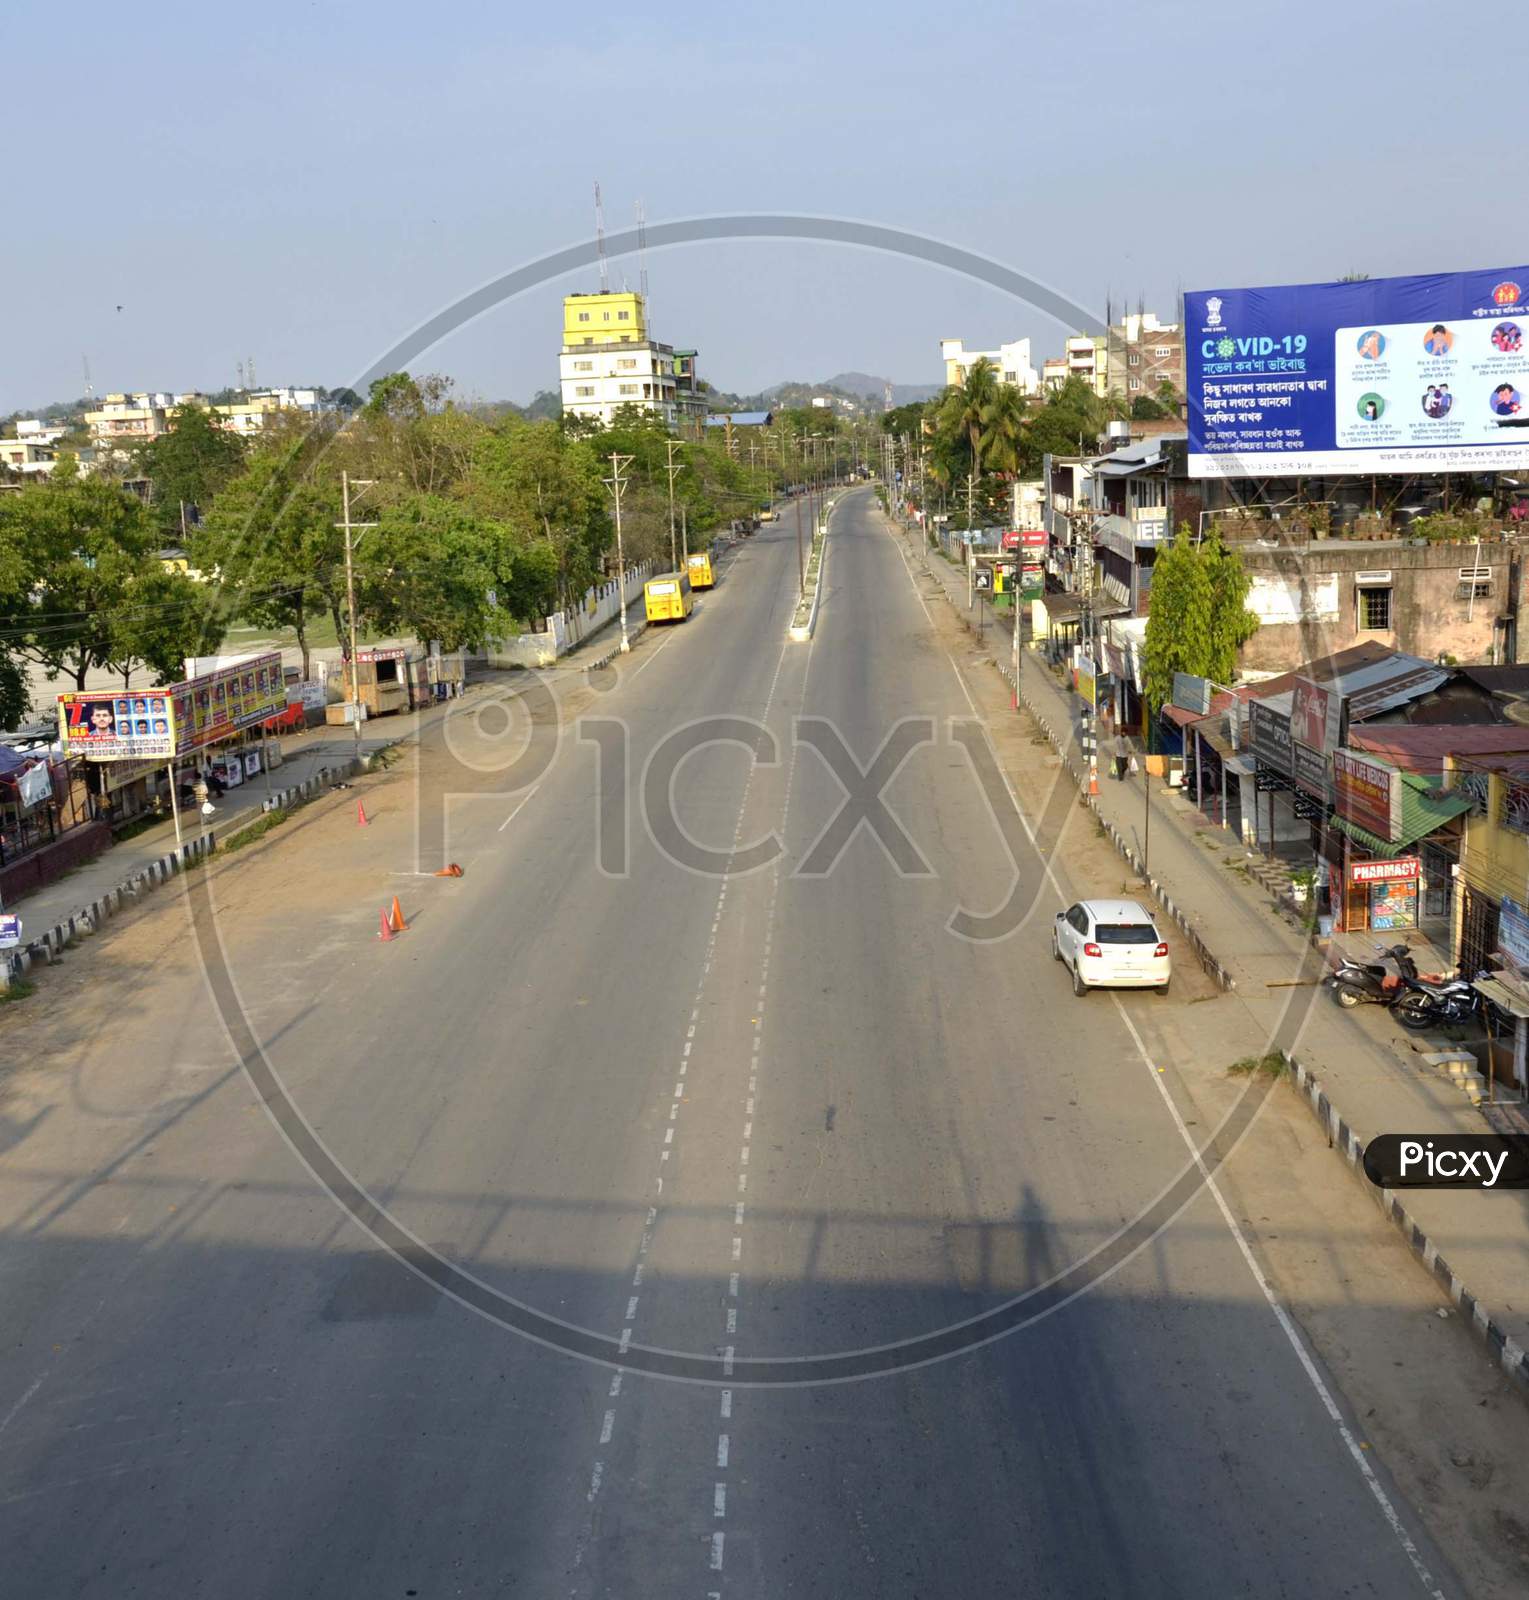 A view of deserted road